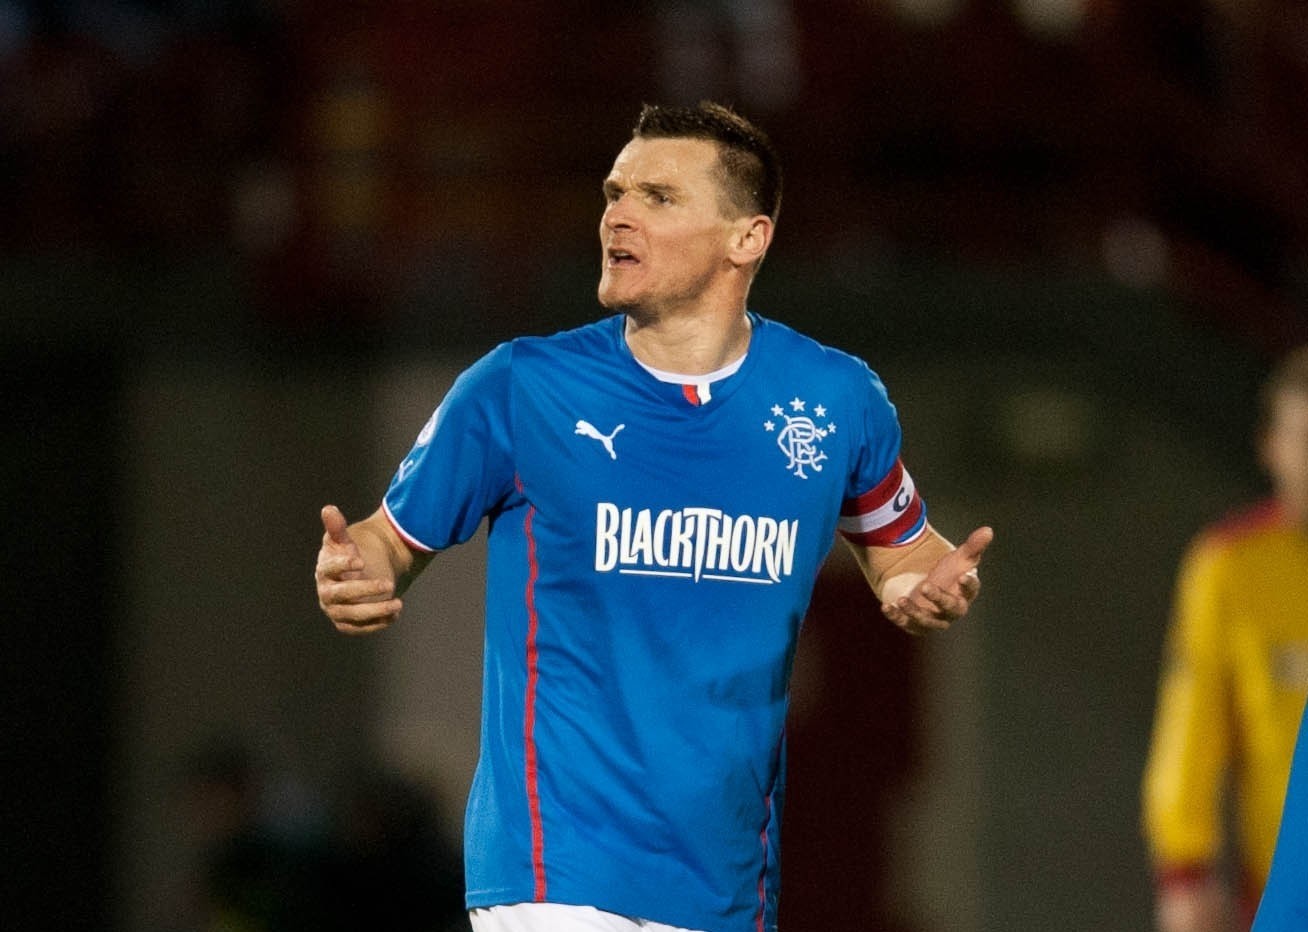 Lee McCulloch has been found guilty on stamping on Dale Carrick